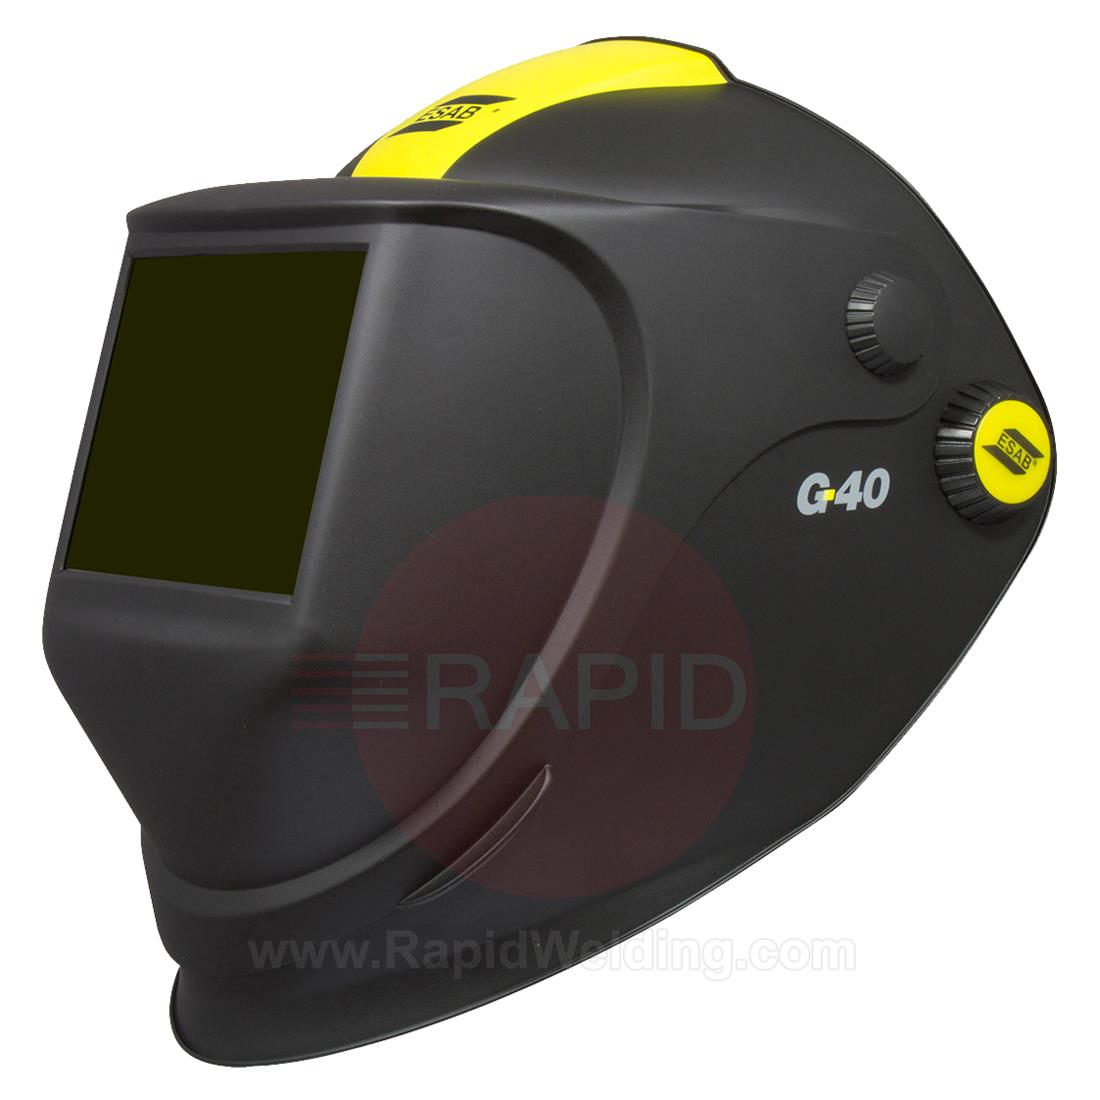 0700000439  ESAB G40 Air Flip-up Weld & Grind Helmet with 110 x 60mm Shade #10 Passive Lens